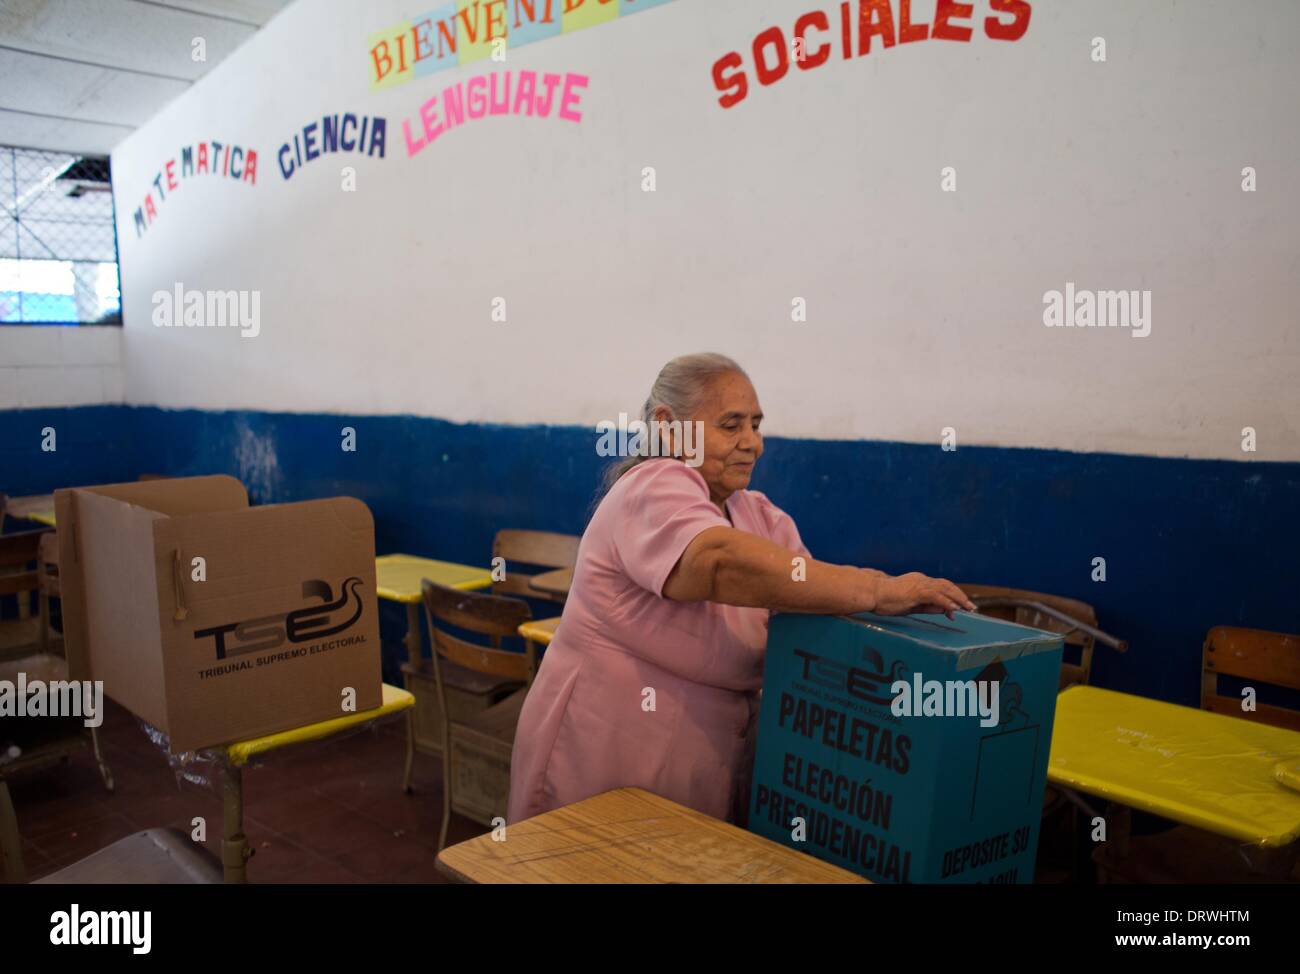 San Salvador, Feb. 2. 1st June, 2014. A citizen casts her ballot during the presidential elections, in Mejicanos sector, in San Salvador, capital of El Salvador, on Feb. 2, 2014. Salvadorans are going to the polls on Sunday to elect a president and vice president for the next five-year term beginning June 1, 2014. © David de la Paz/Xinhua/Alamy Live News Stock Photo